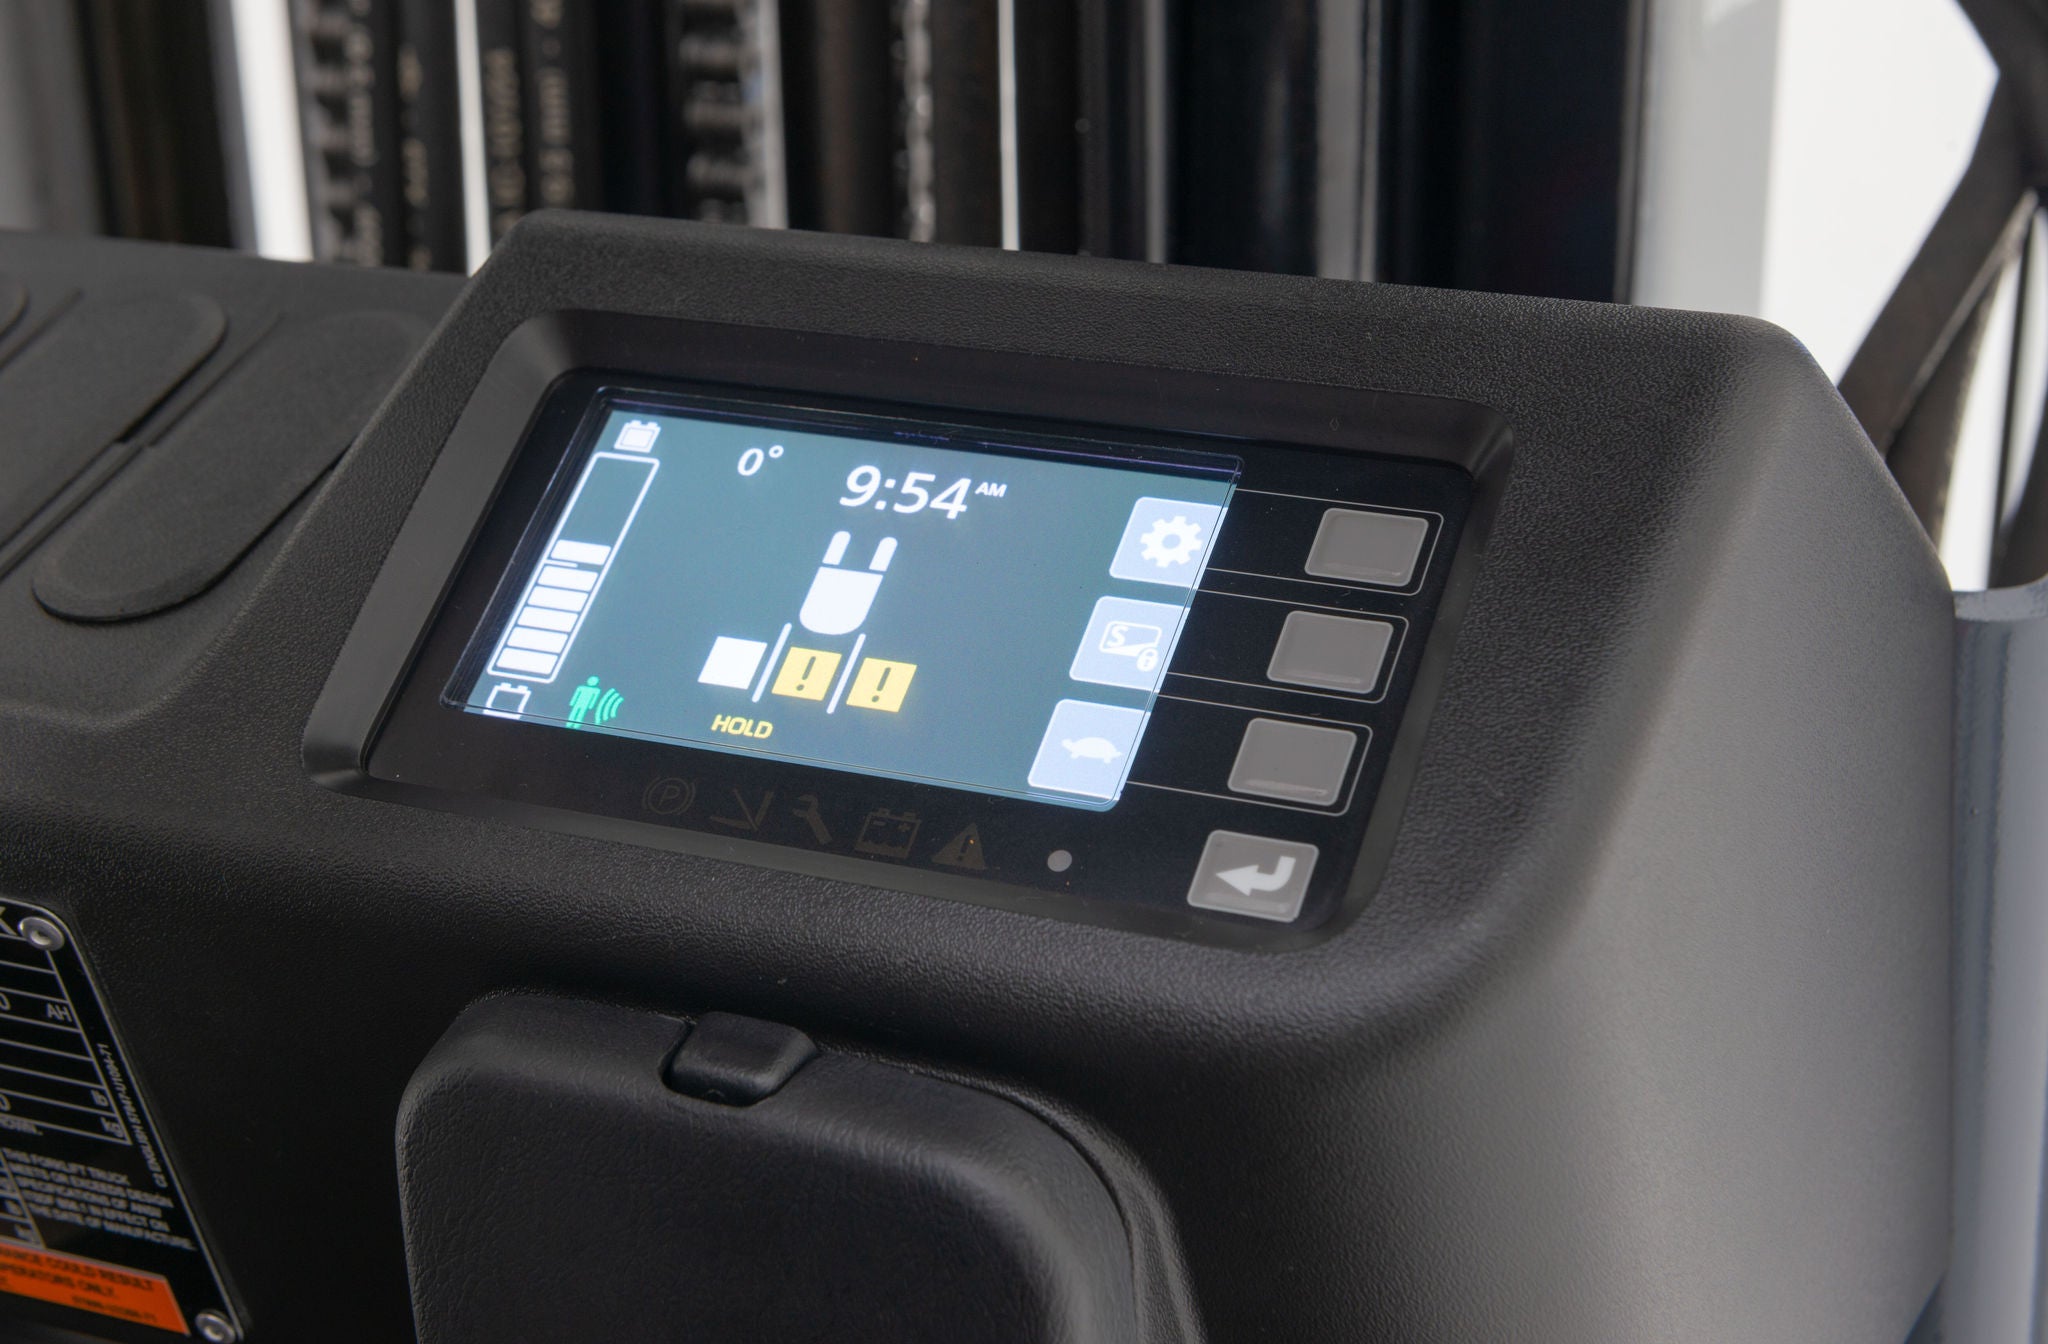 Close up image of Toyota's 3-Wheel Electric Forklift's LCD multifunction display